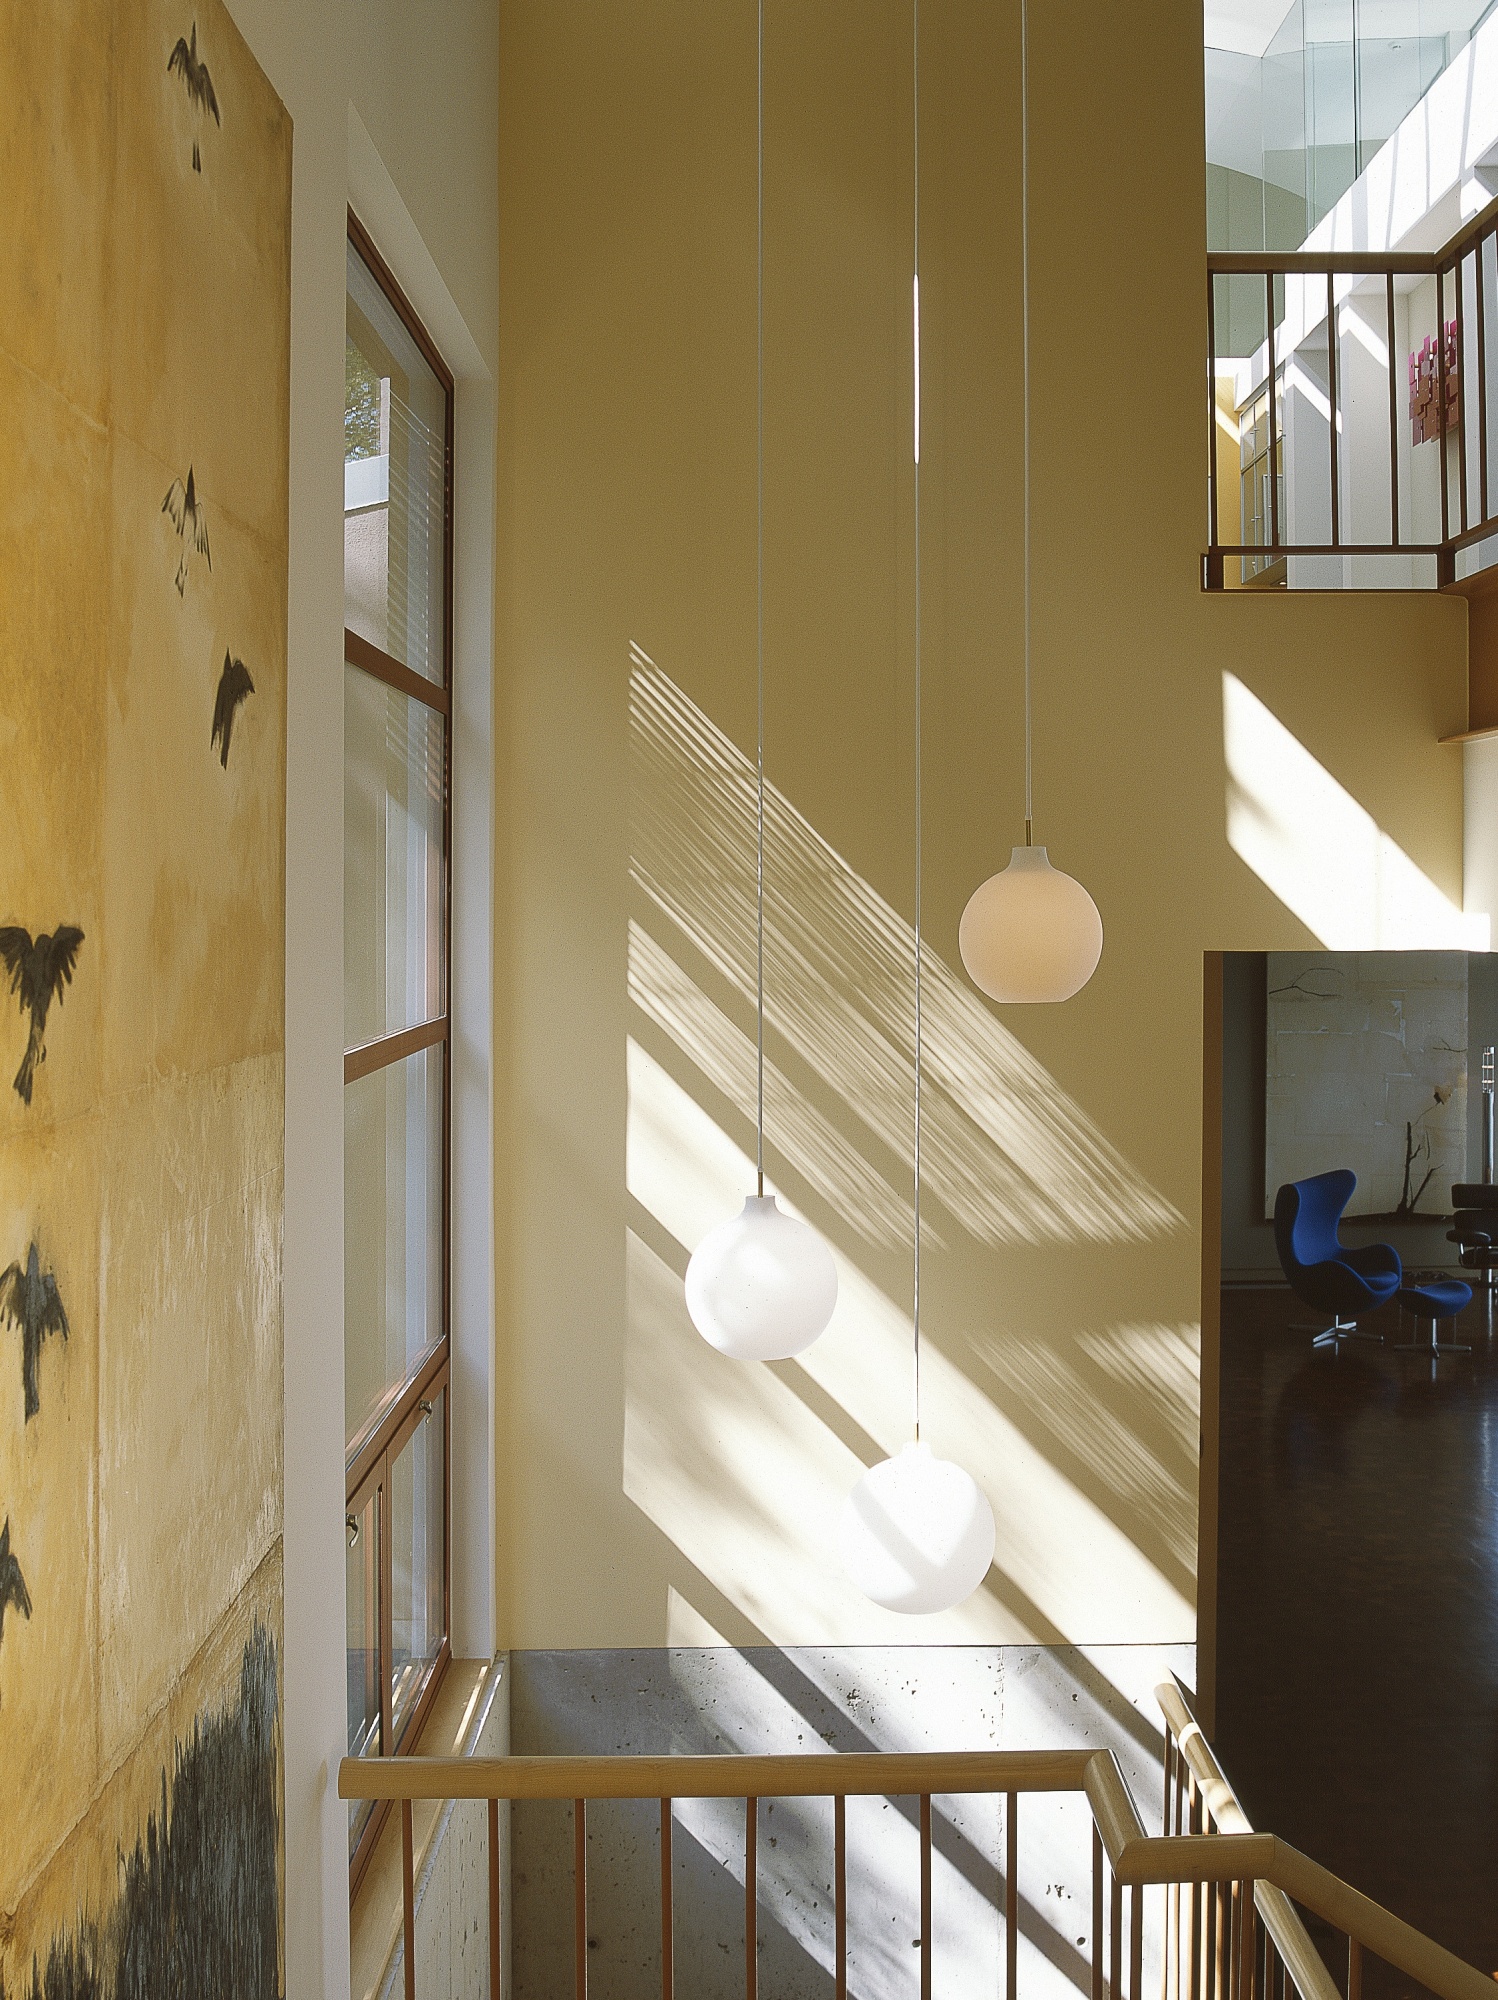 Louis Poulsen lighting provide simple yet elegant solution to a two story volume.